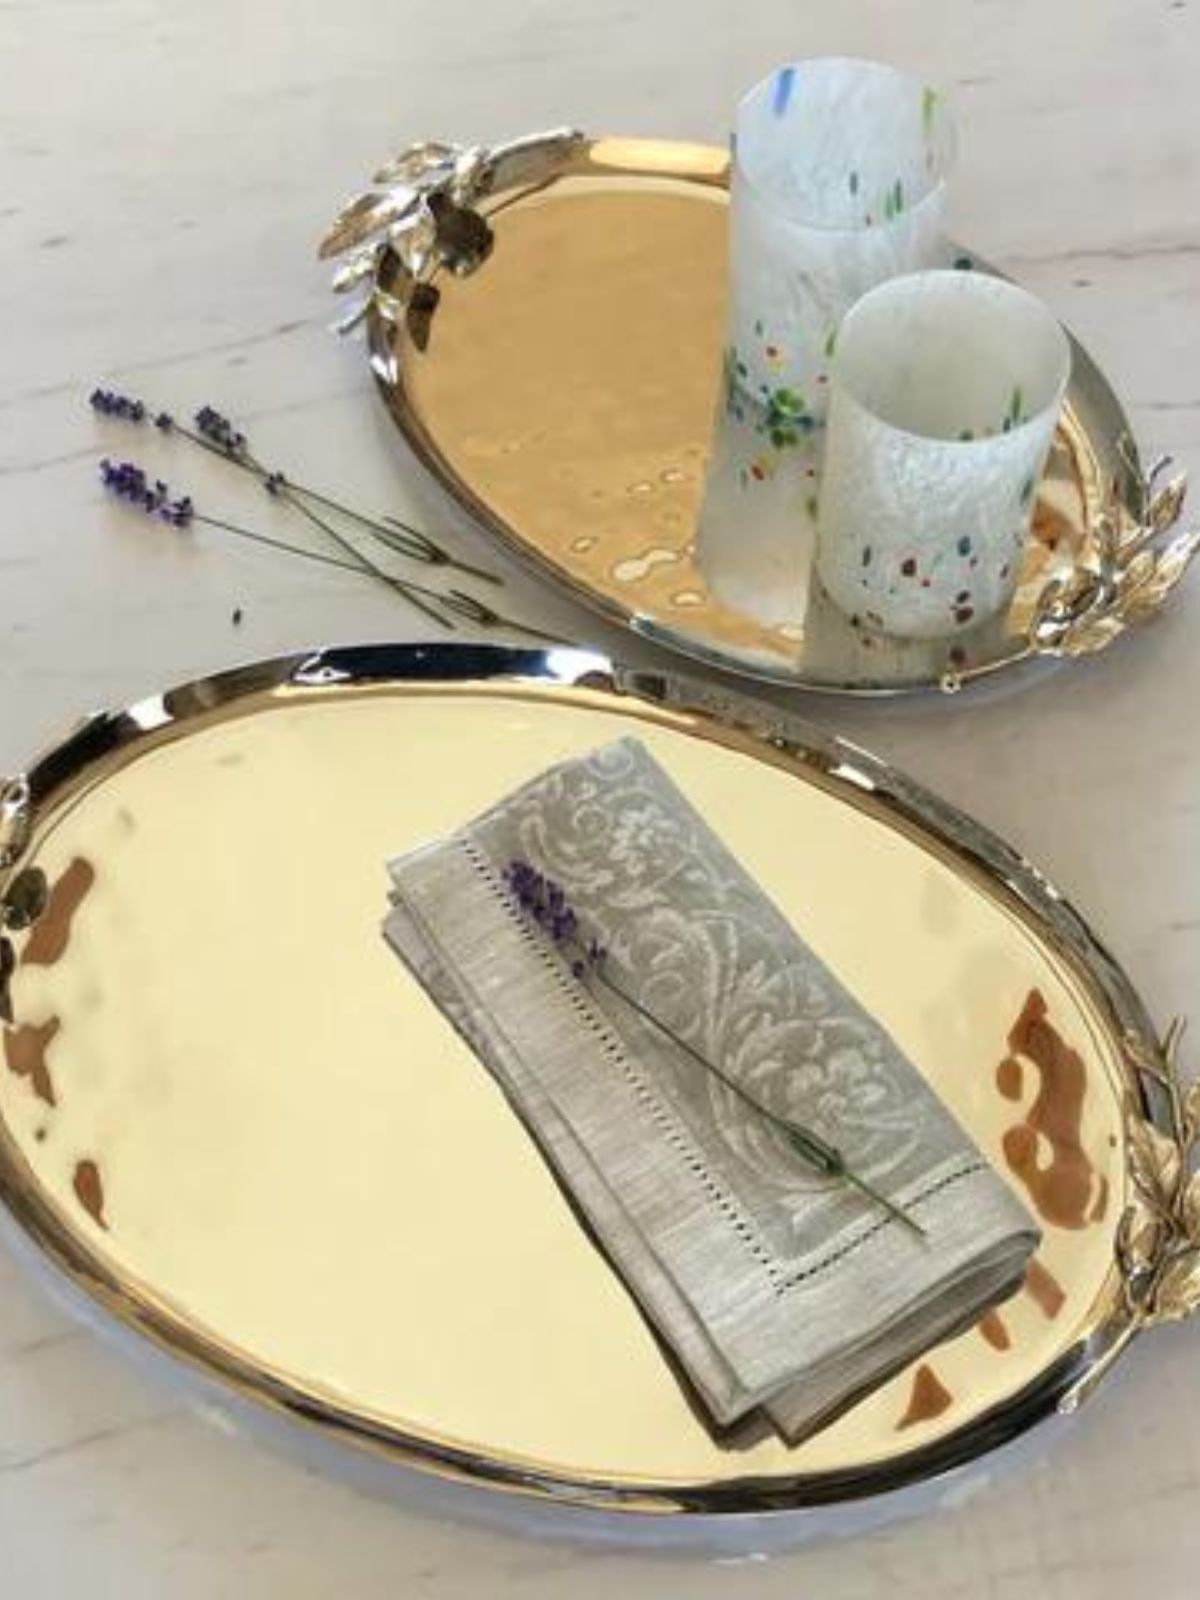 Stainless Steel Medium Oval Tray with Olive Leaf Design. Featuring The collection sold by KYA Home Decor.